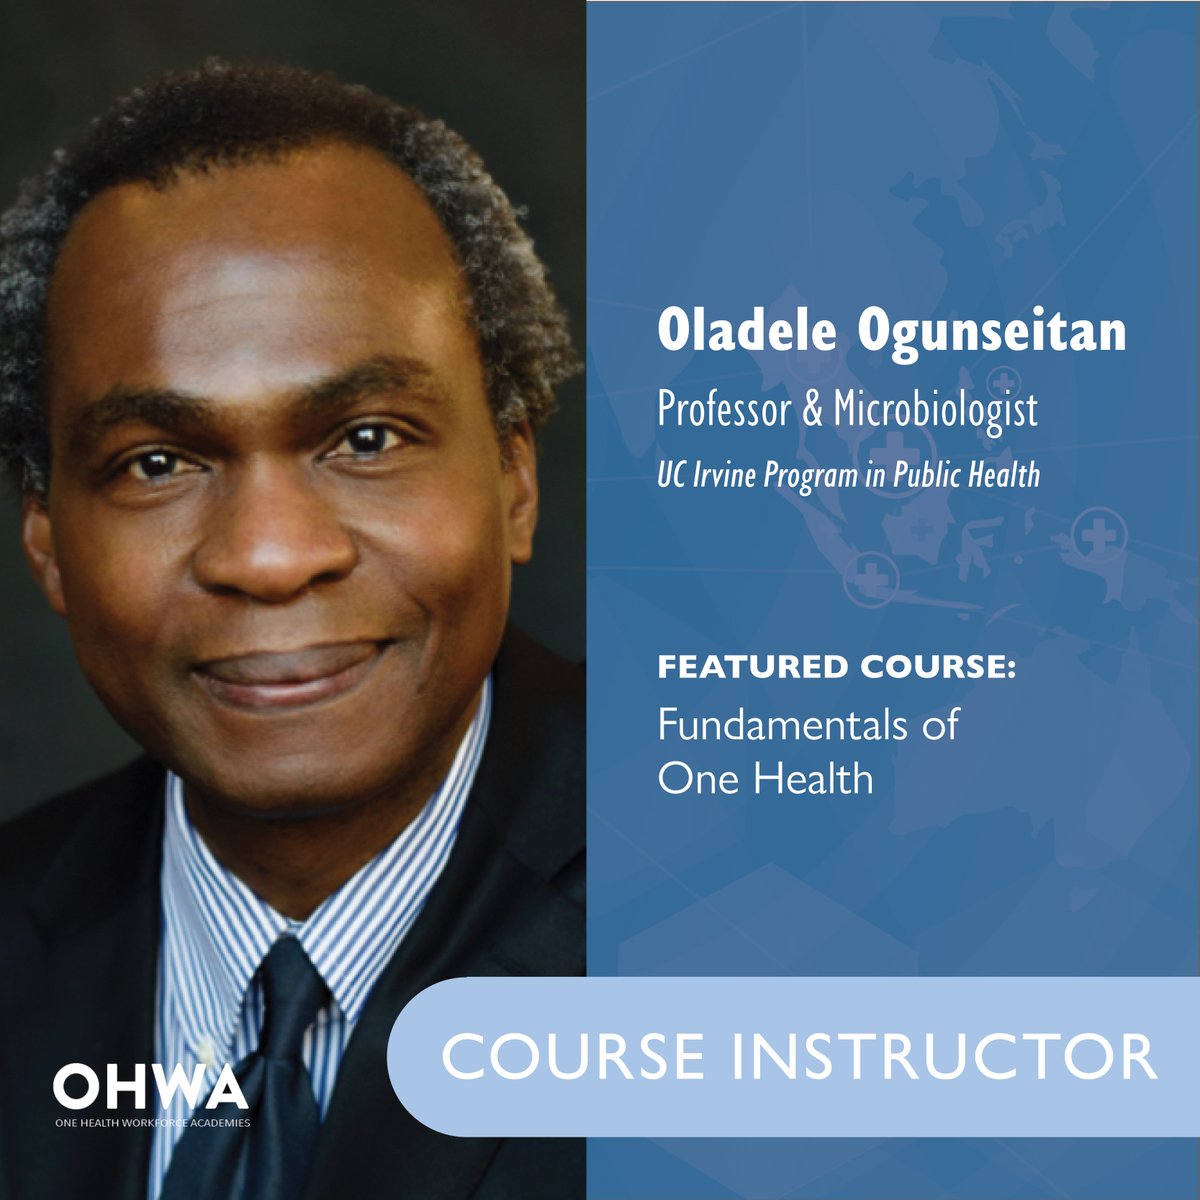 OHWA INSTRUCTOR SPOTLIGHT: Oladele Ogunseitan is a Professor of Population Health and Disease Prevention at @UCIrvine Program in Public Health. He is a renowned global health expert and a preeminent researcher on AMR and stewardship. Learn more: publichealth.uci.edu/faculty/ogunse…